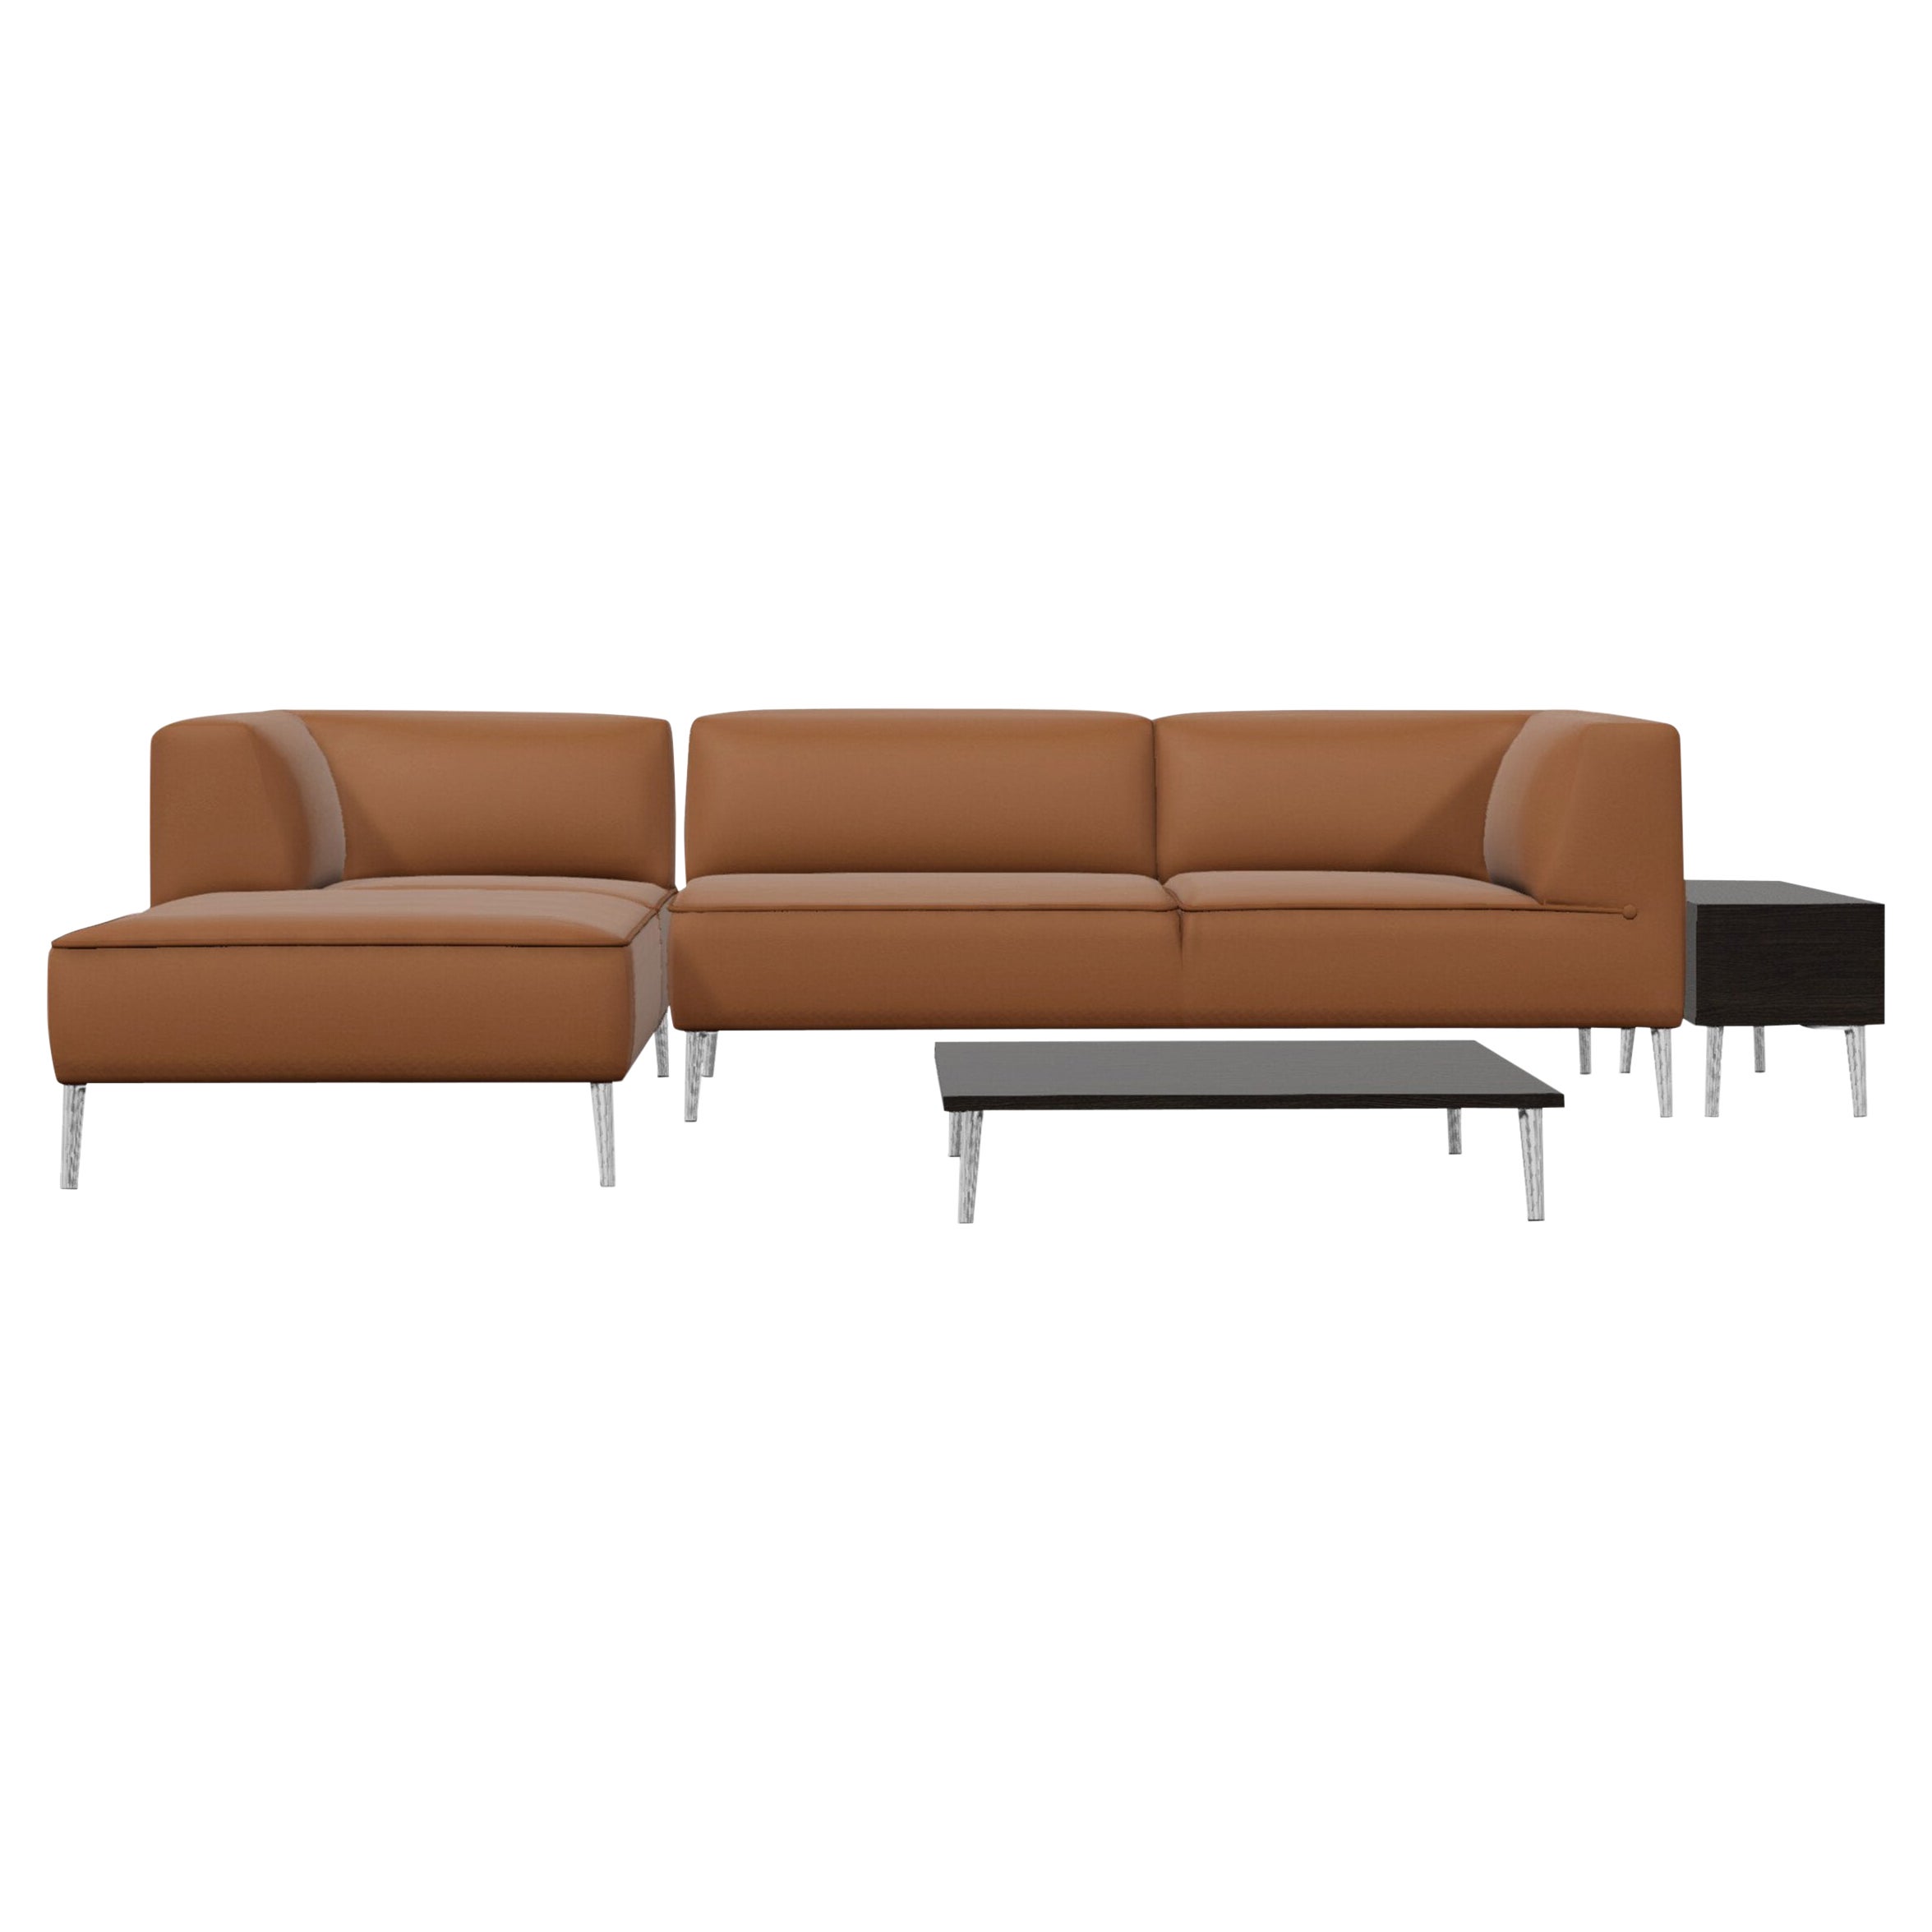 Moooi Sofa So Good Chaise Longue Left with Elements in Shade Ochre Upholstery For Sale